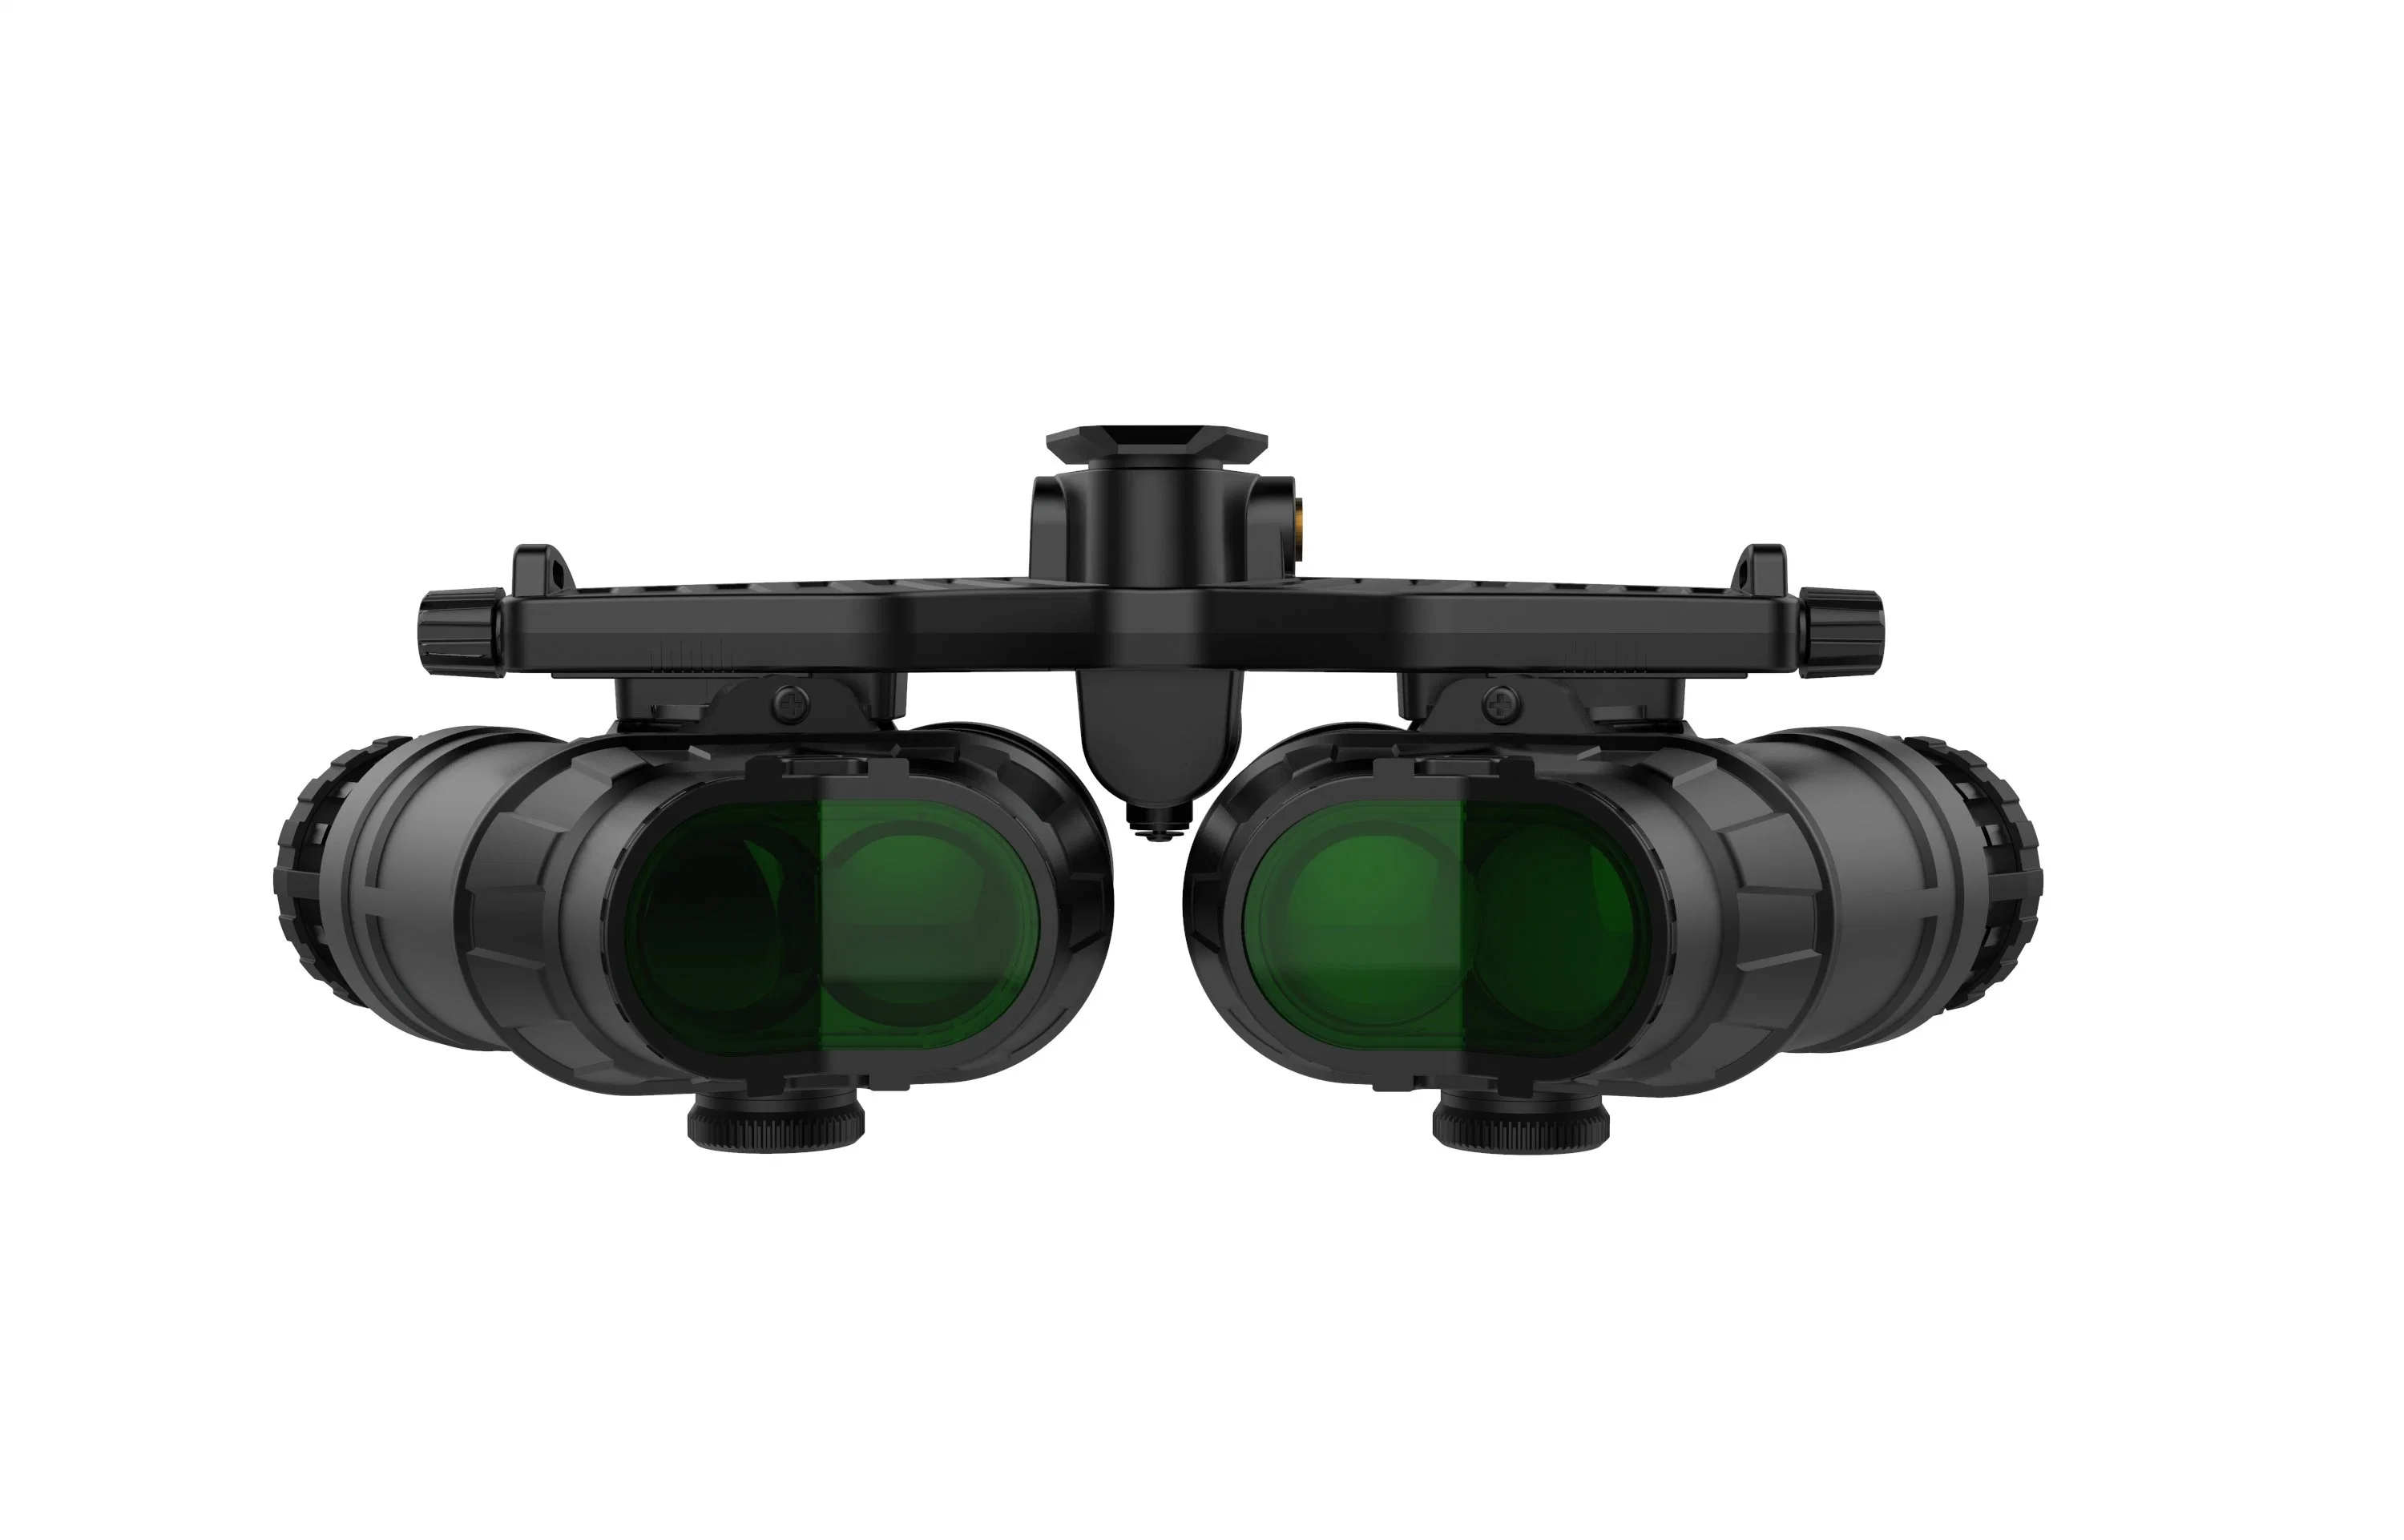 Infrared Night Vision Telescope Optic Military Binoculars for Observation